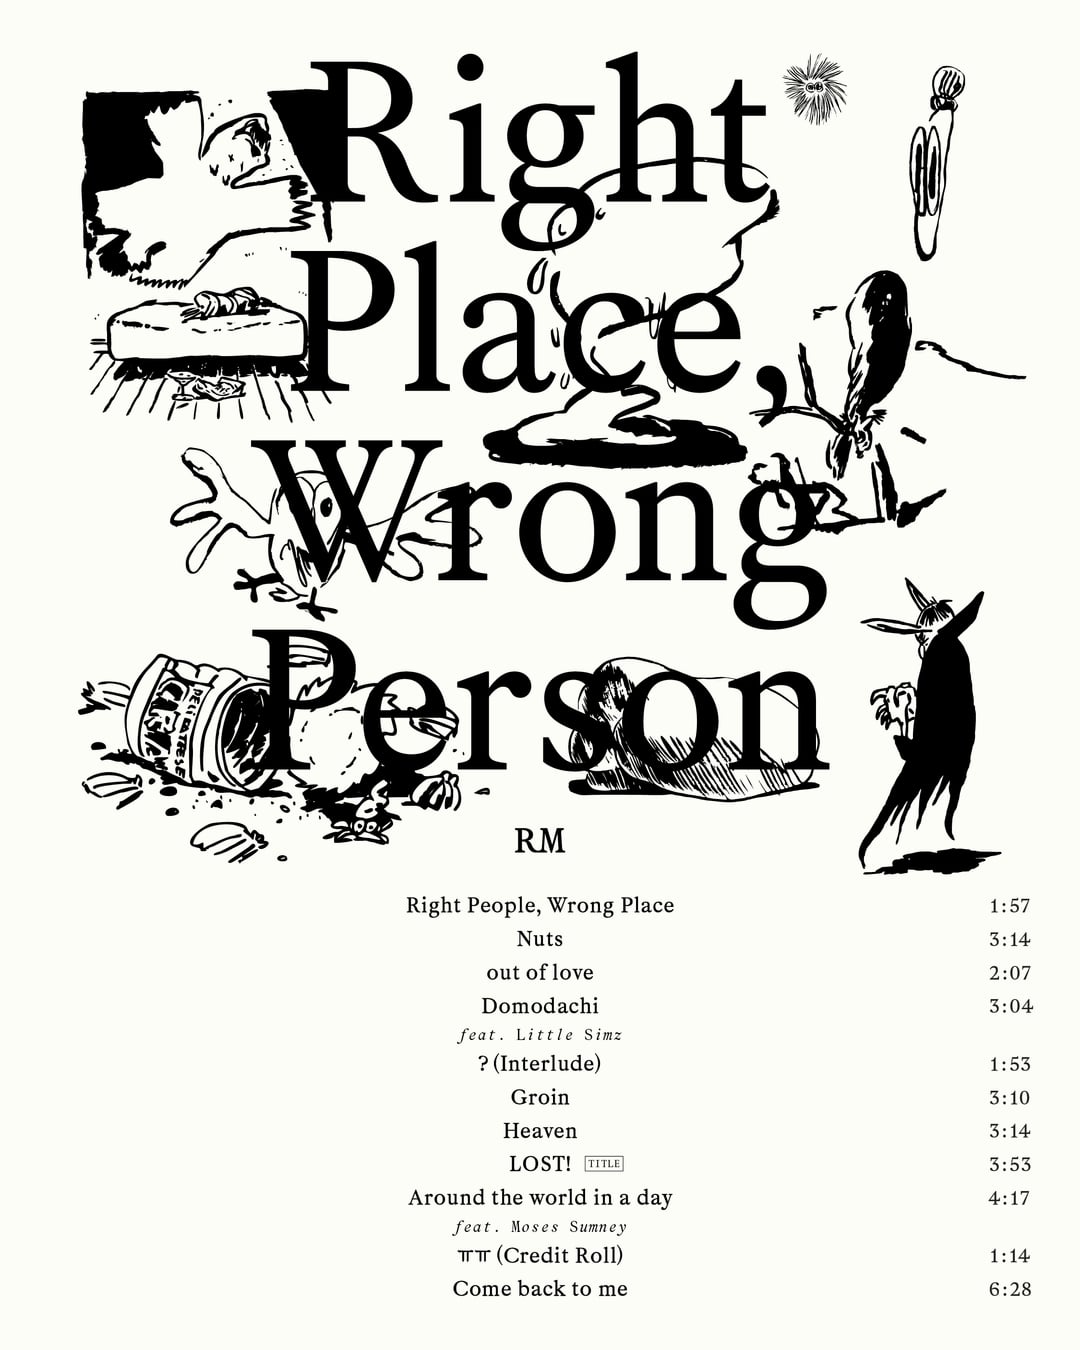 RM 'Right Place, Wrong Person' Tracklist - 180524